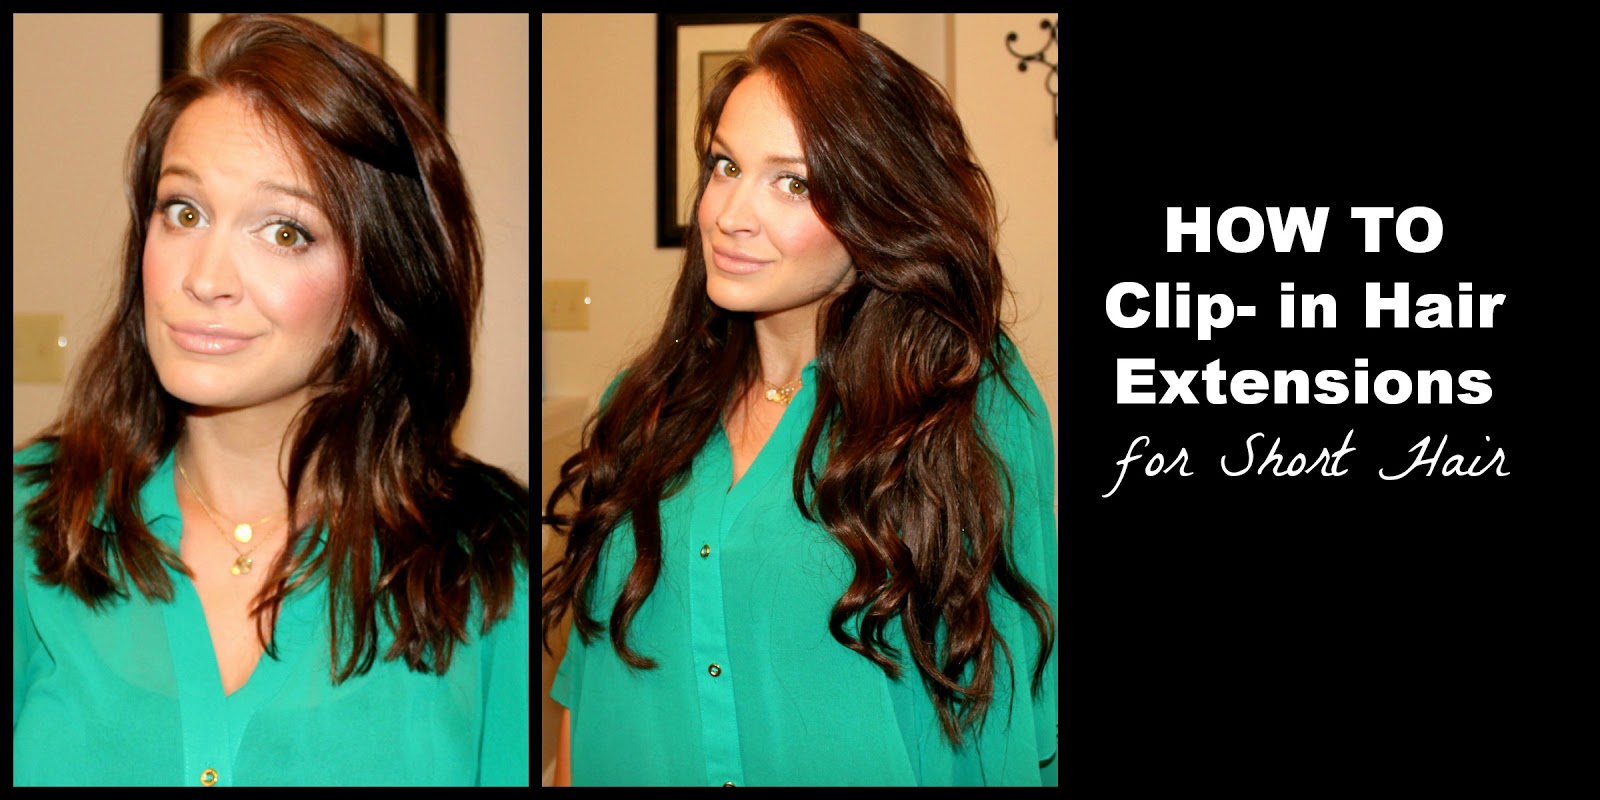 BentleyBlonde How To Clip In Hair Extensions For Short Hair